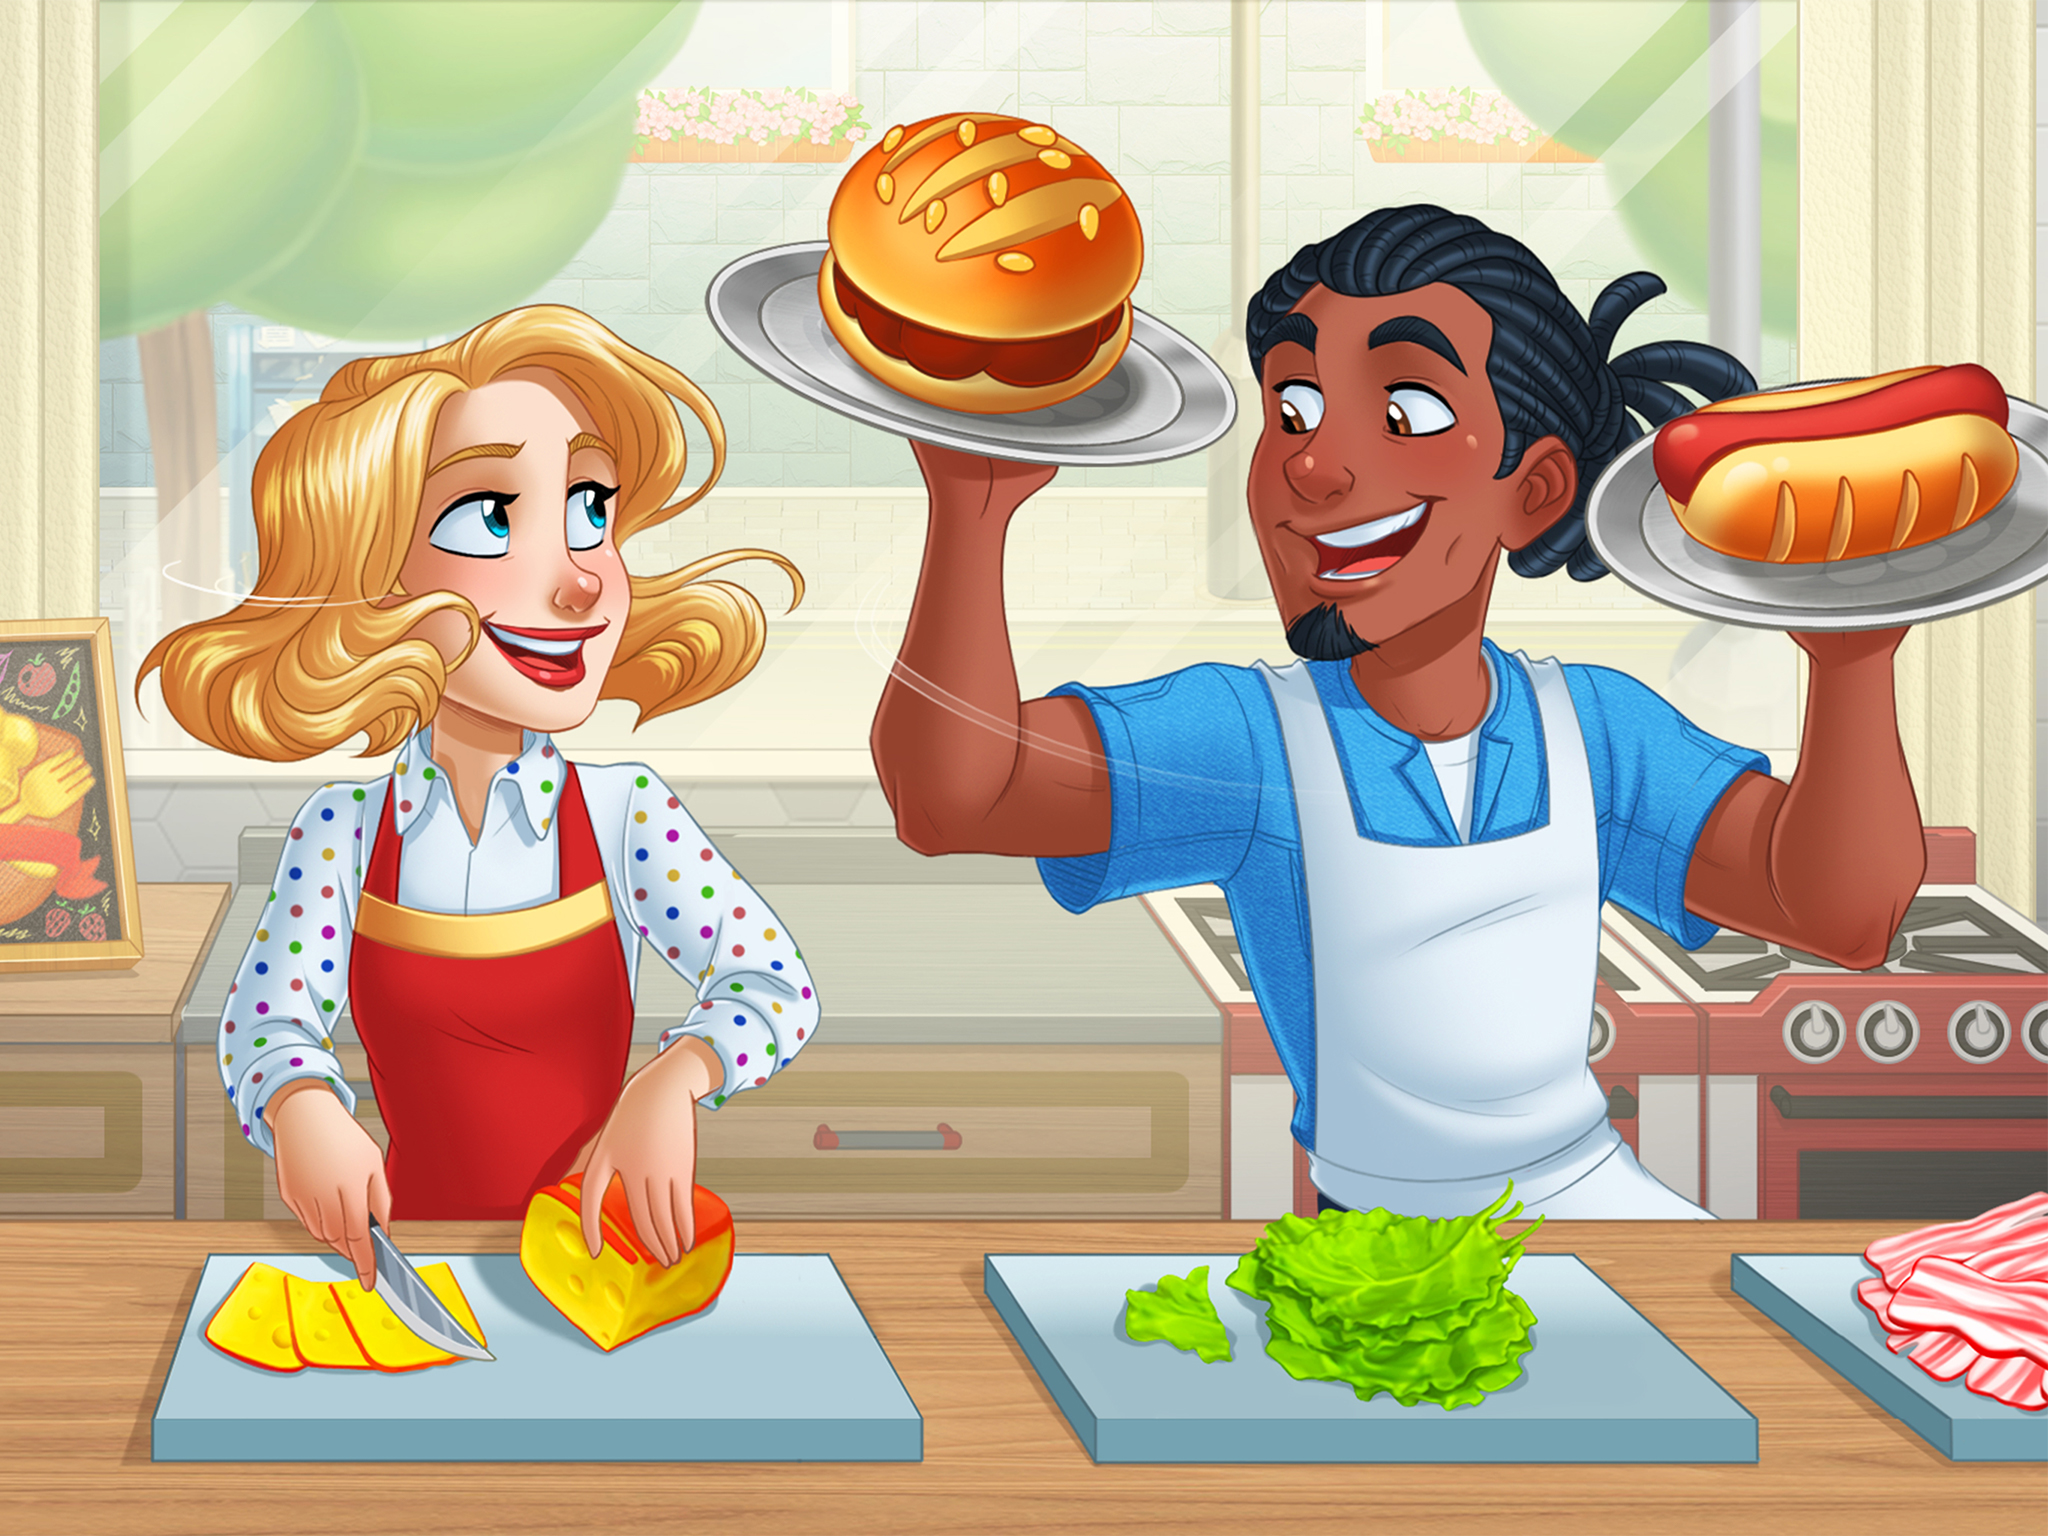 cooking diary® restaurant game